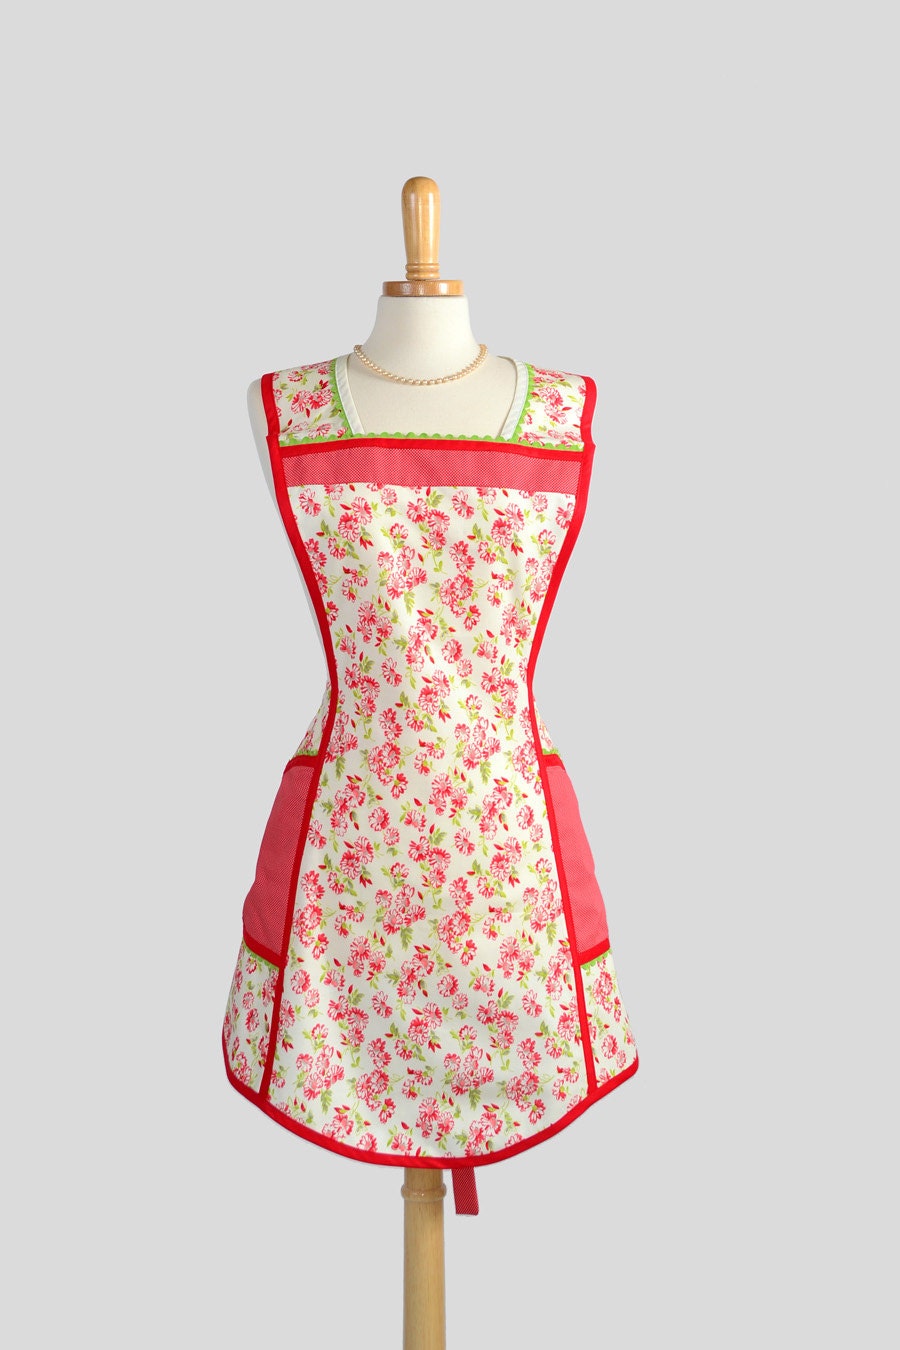 Retro Full Kitchen Apron / Womens Apron for Christmas and all Year Thru in Red Floral Bonnie and Camille Moda Fabric